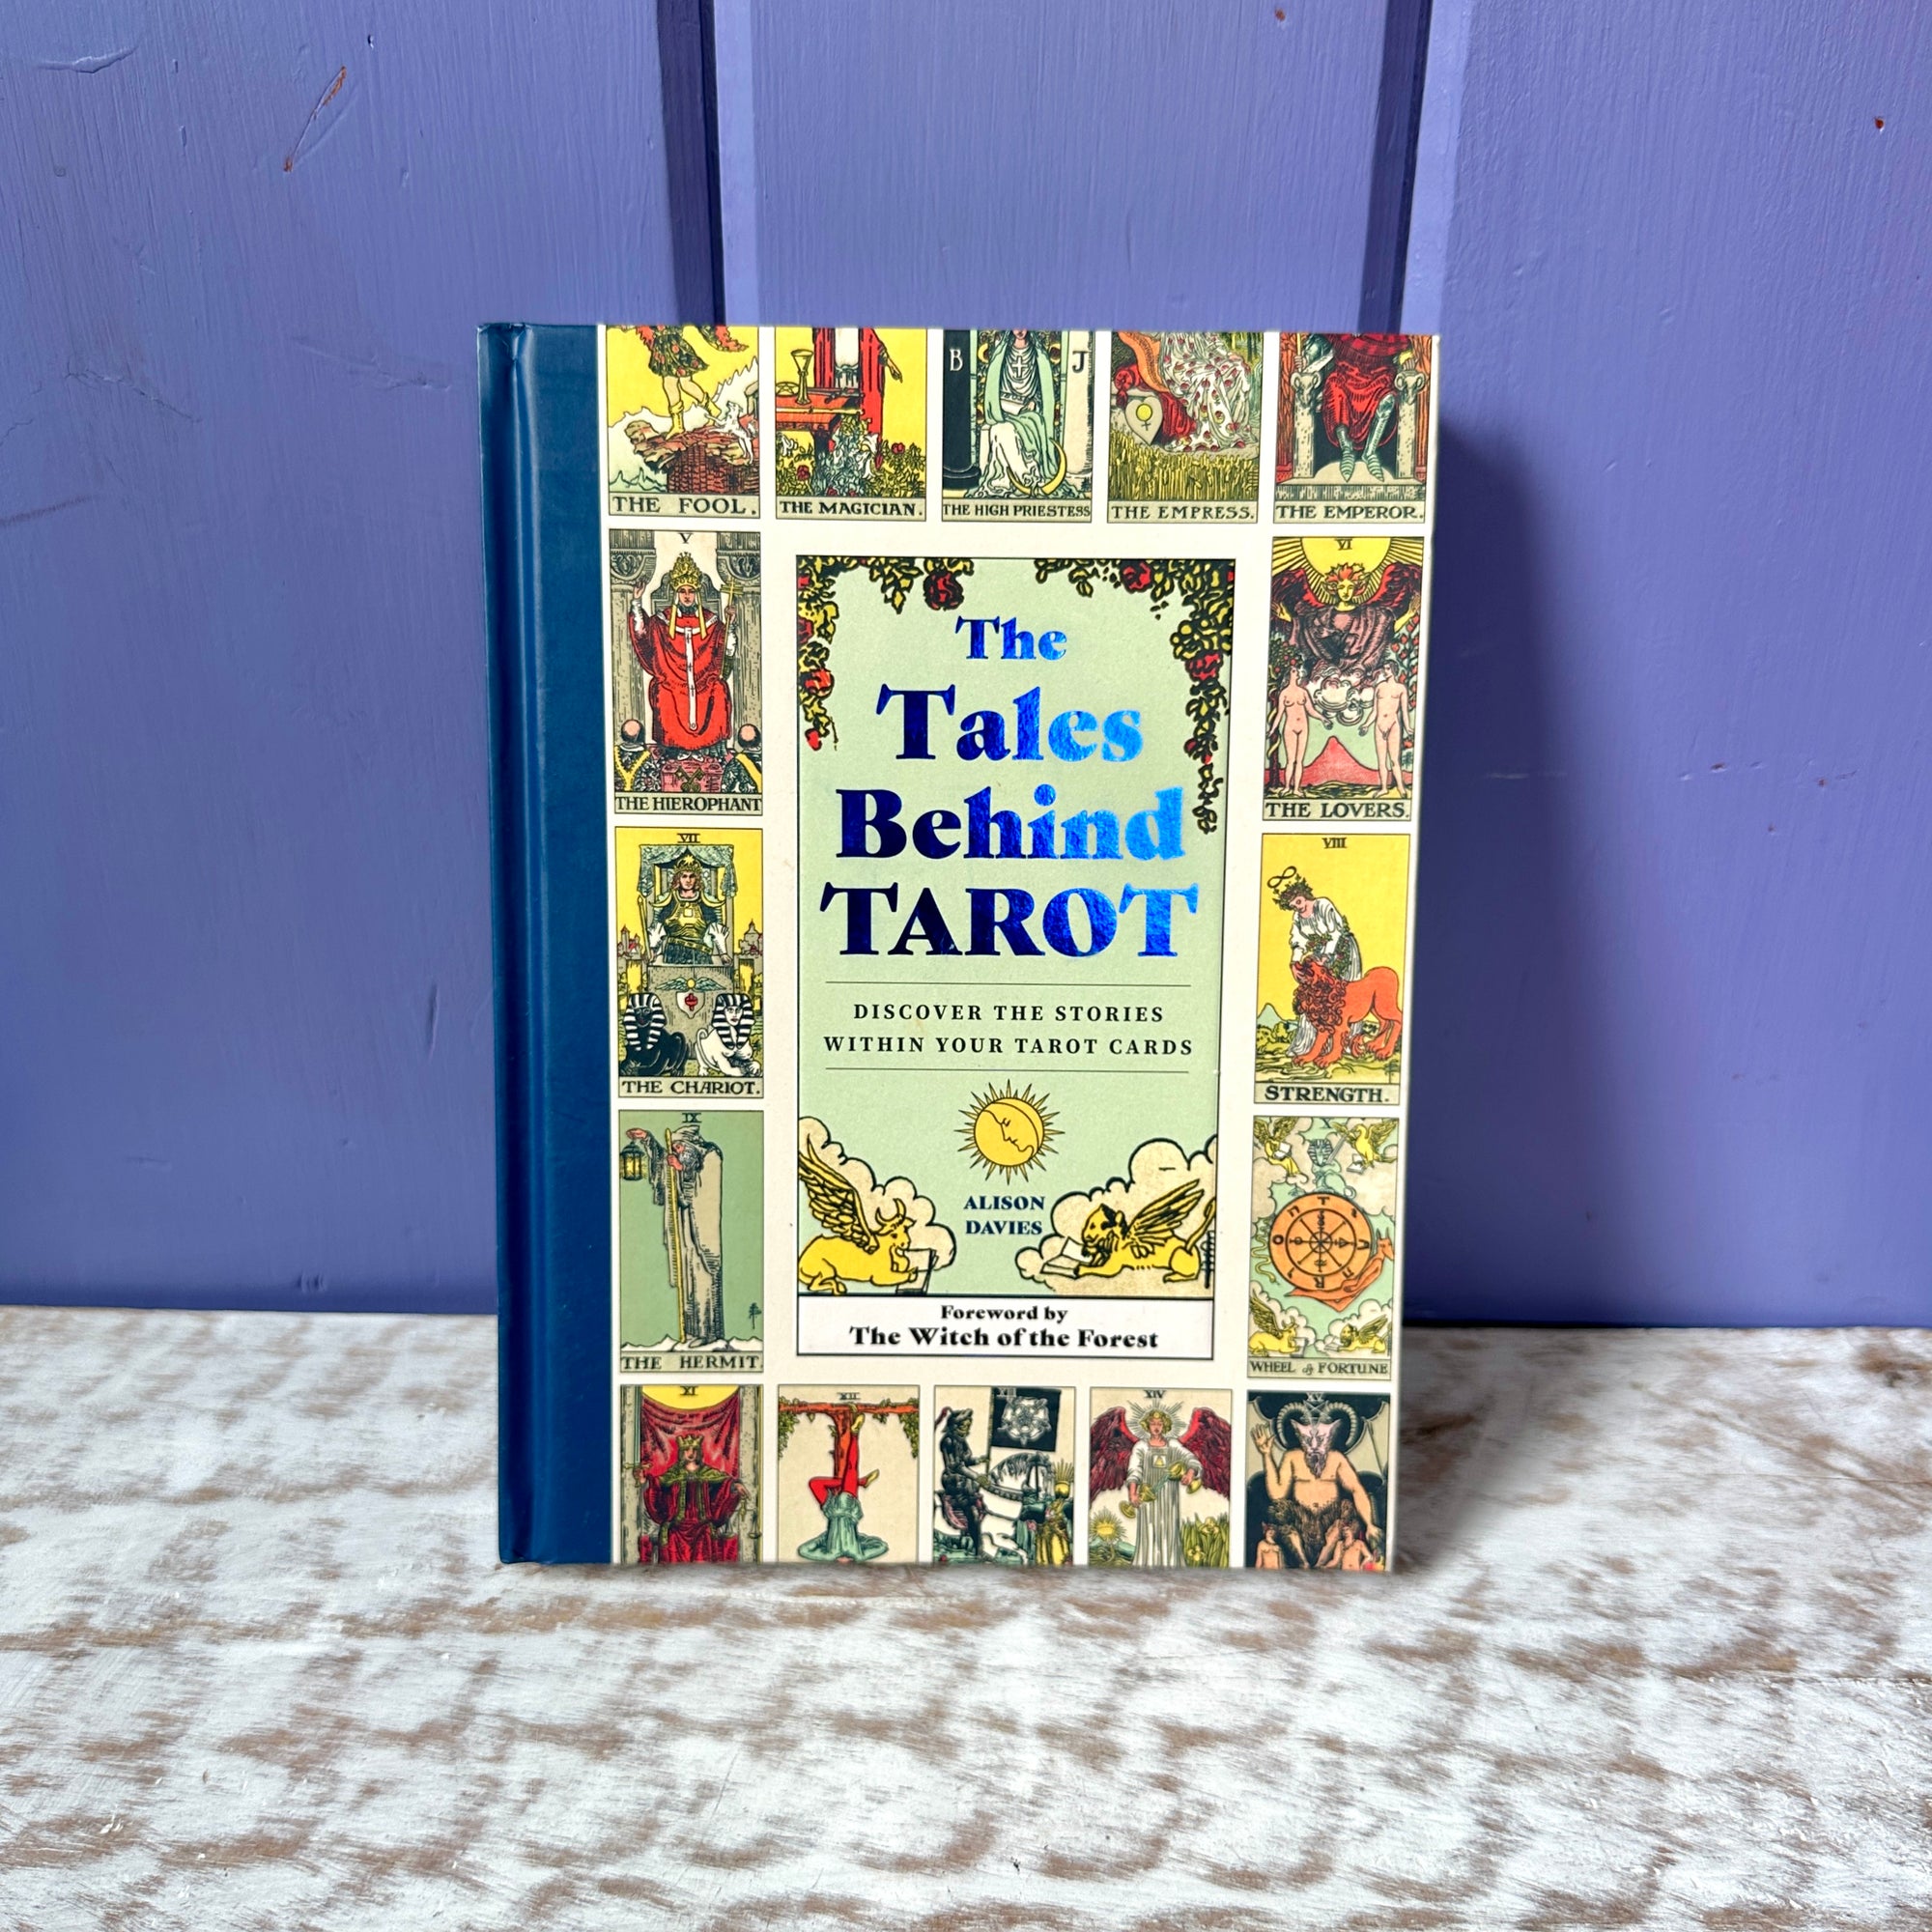 The Tales Behind Tarot: Discover the stories within your tarot cards